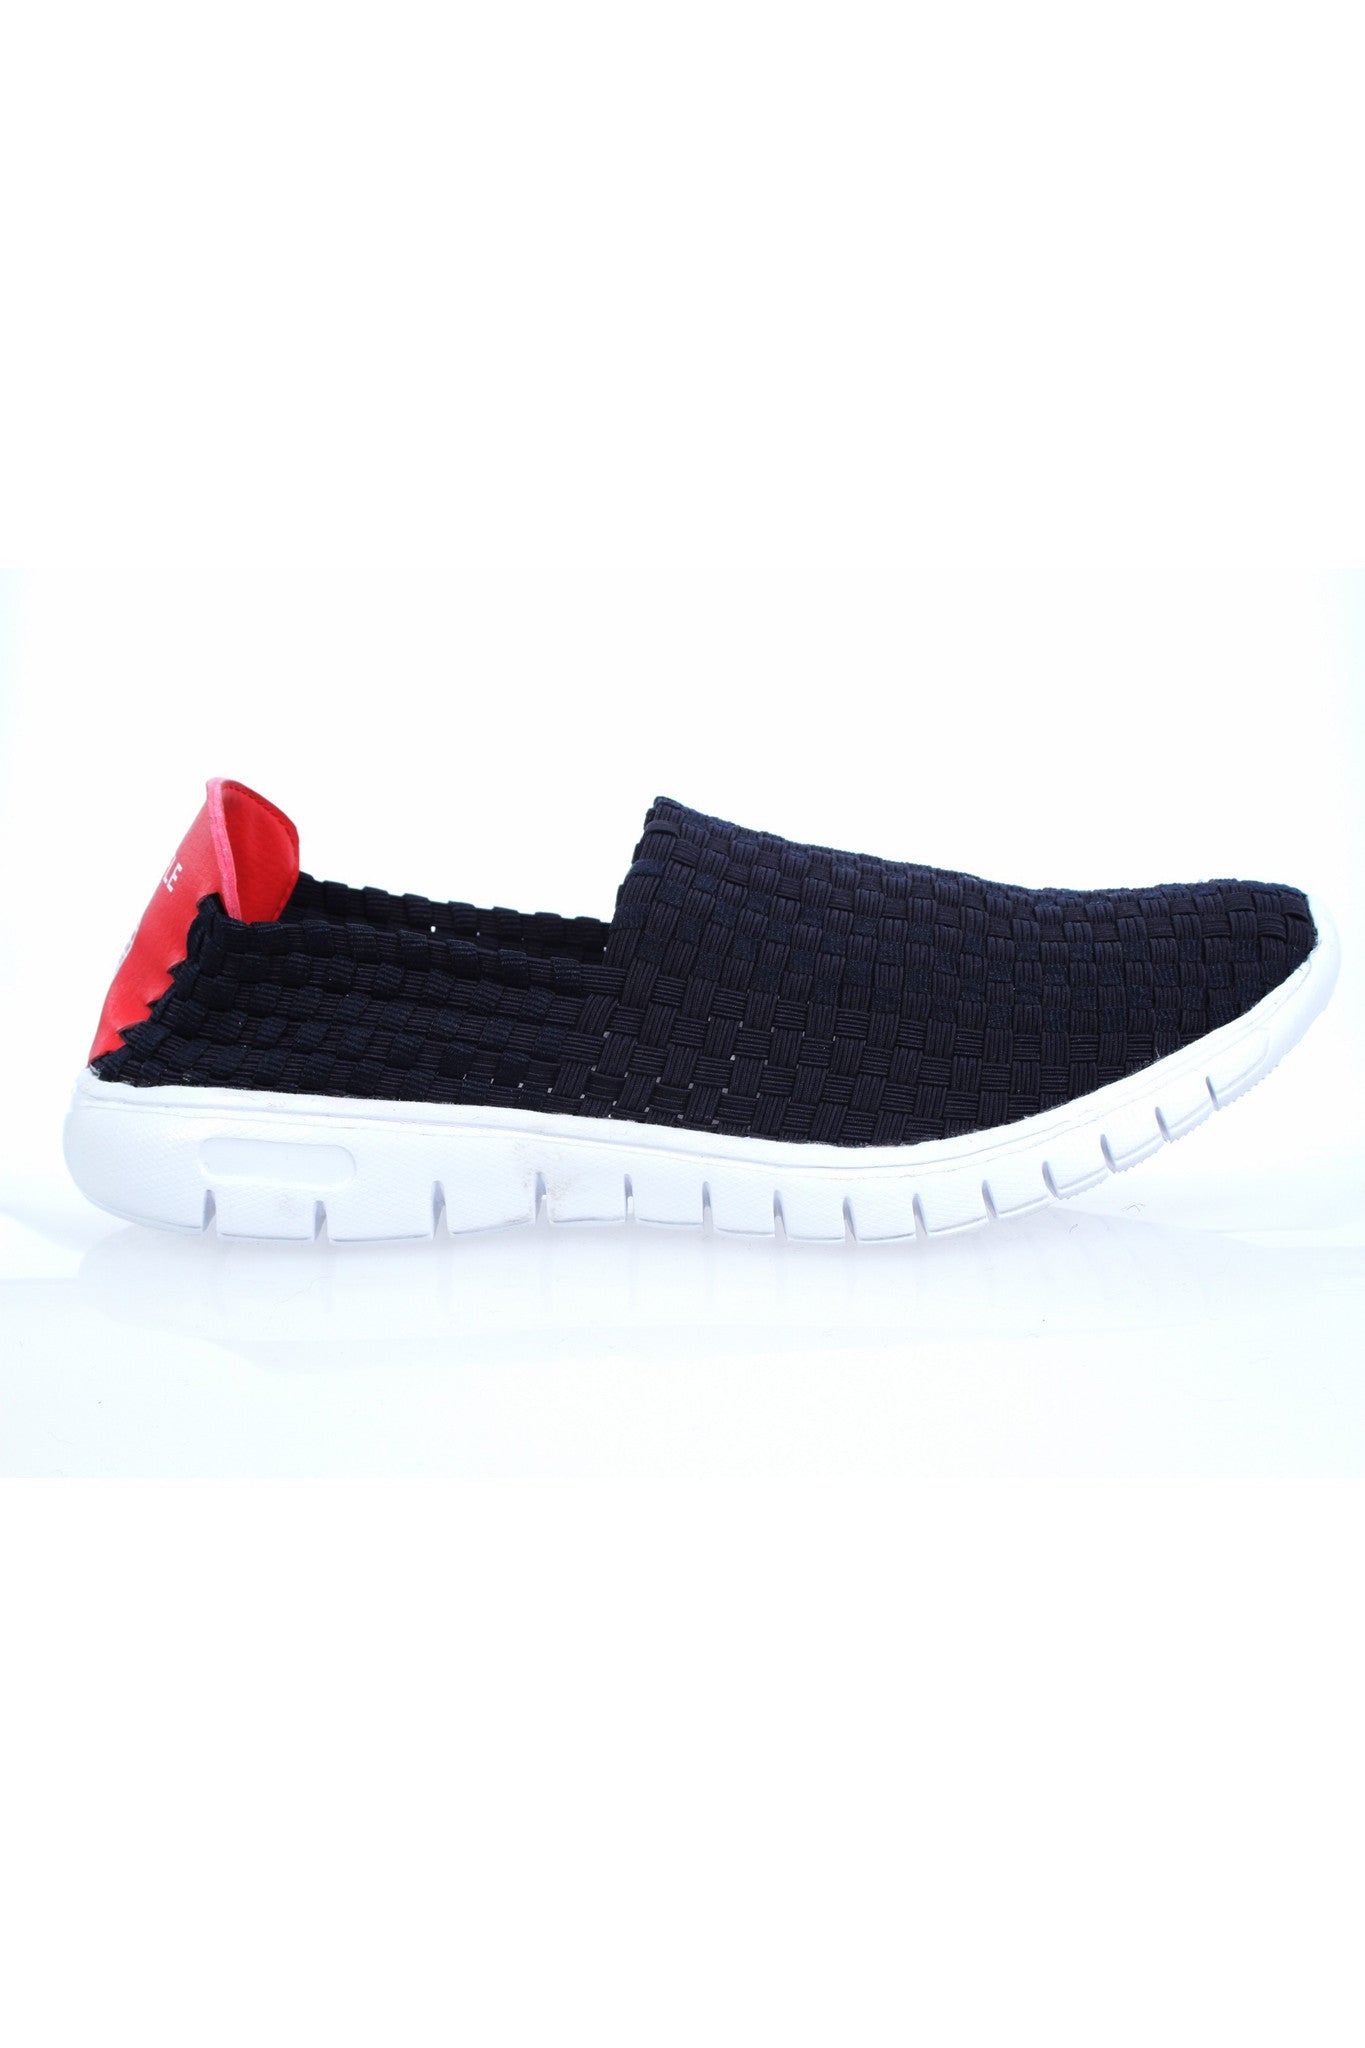 Waffle Pump Mens Casual Navy Sneakers Comfy Slippers